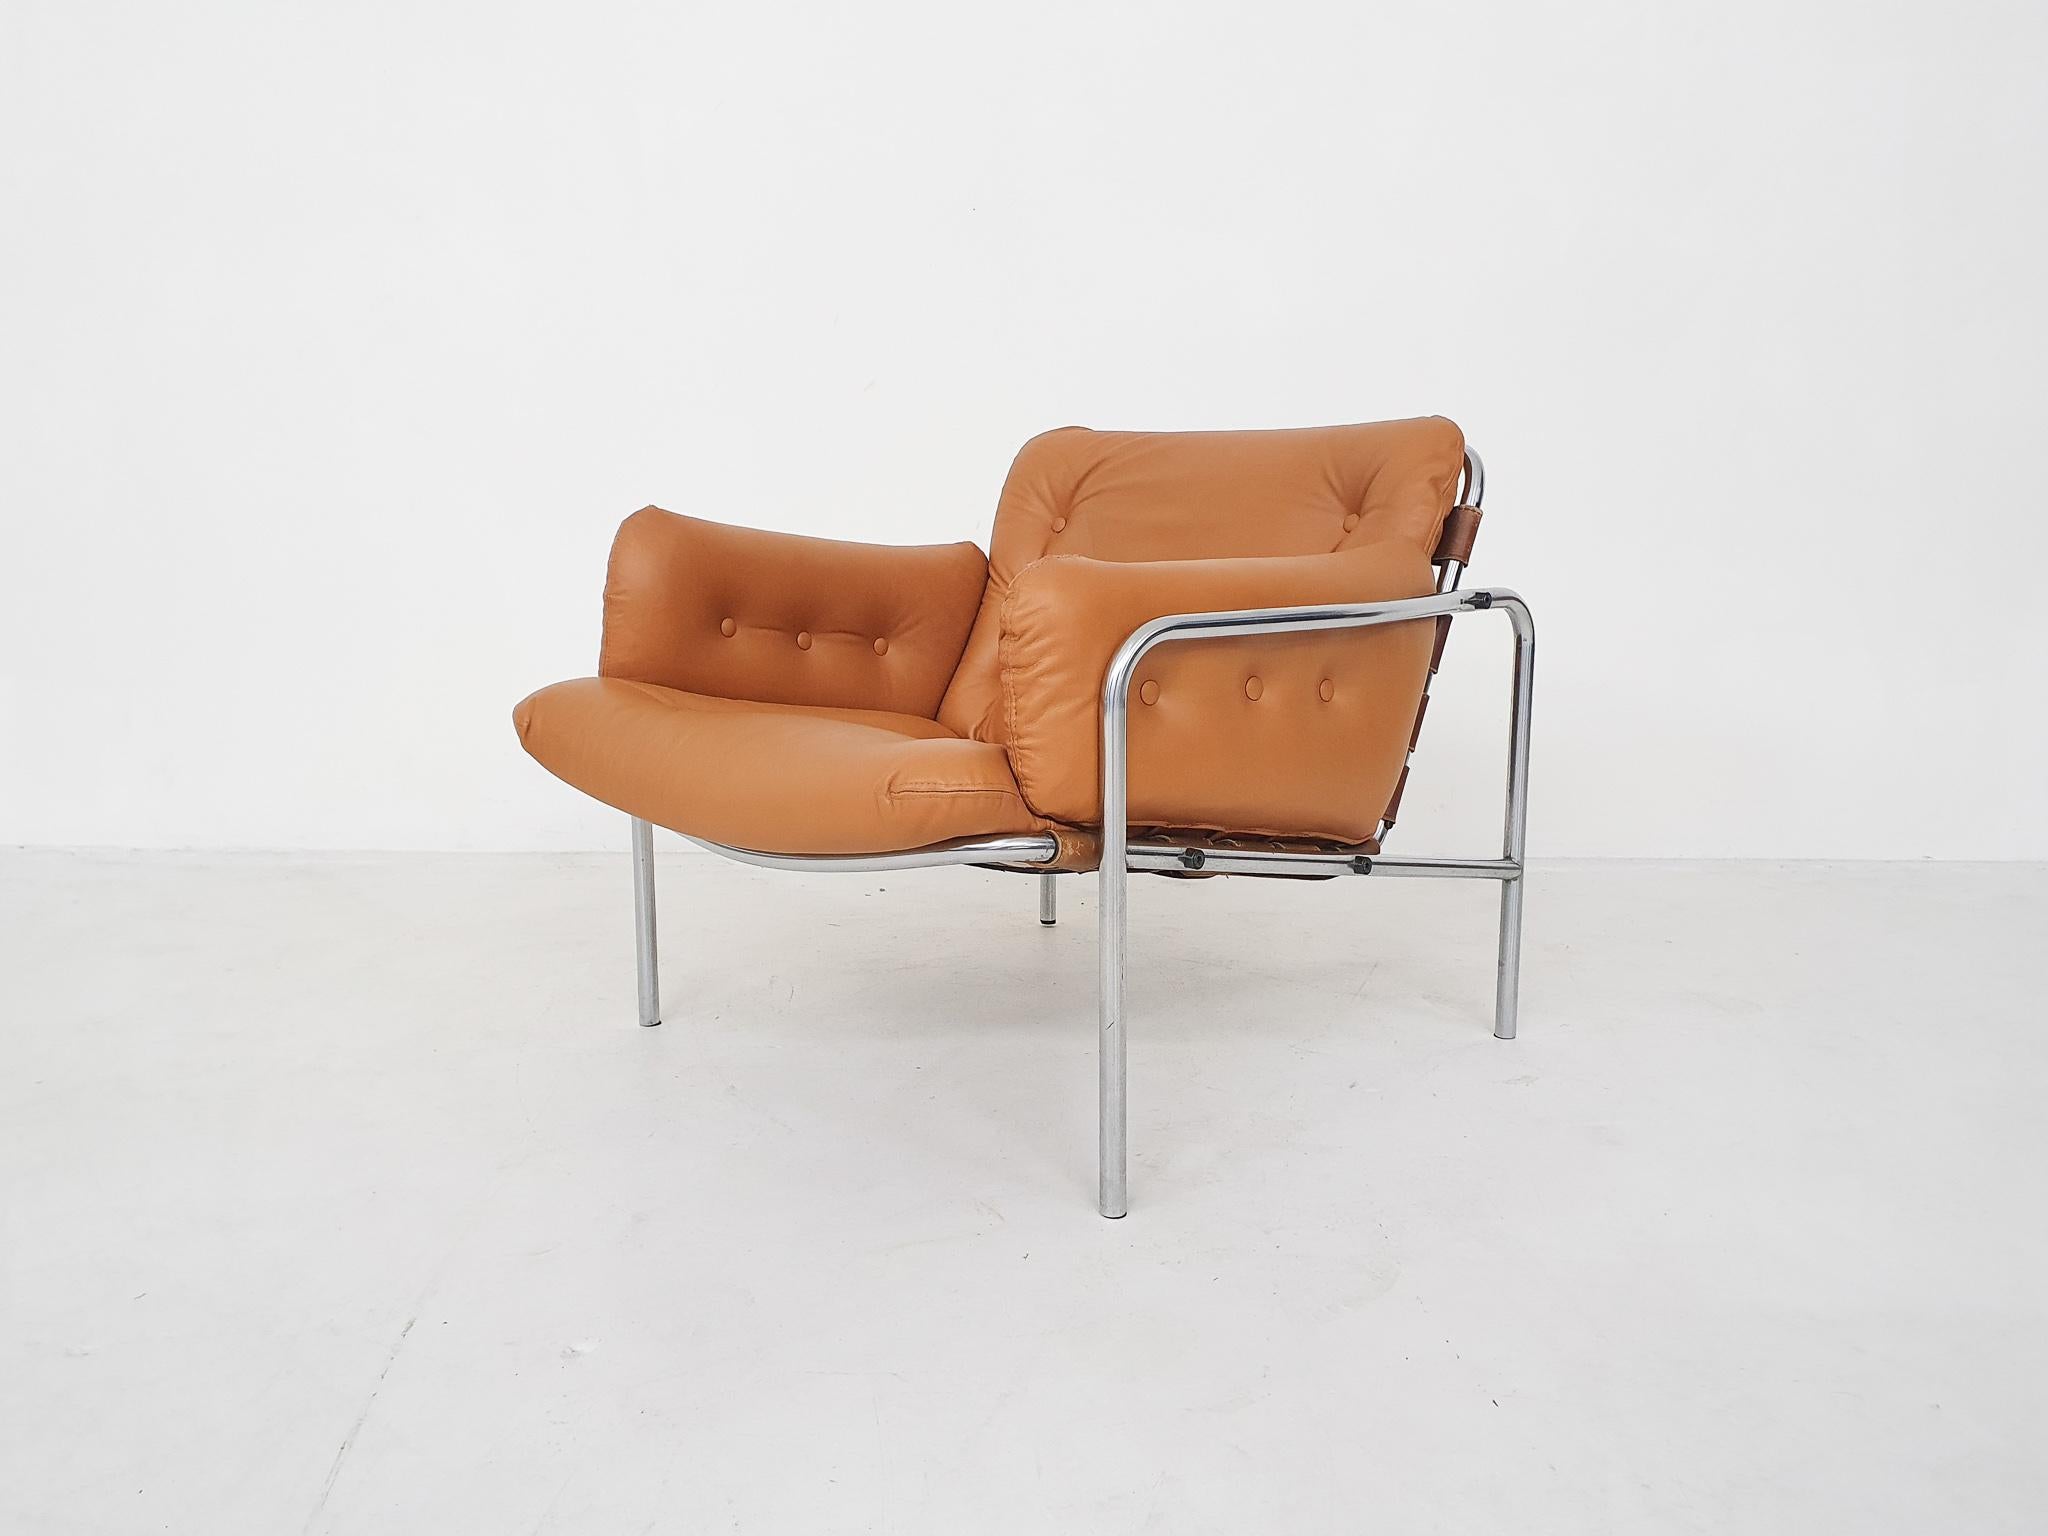 Chrome tubular frame and new cognac leather upholstery.

Measures: Seat height 38 cm,
Seat depth 51 cm
Seat width 53 cm.

Martin Visser was one of the leading Dutch designers of the midcentury together with Cees Braakman, Gijs van der Sluis,